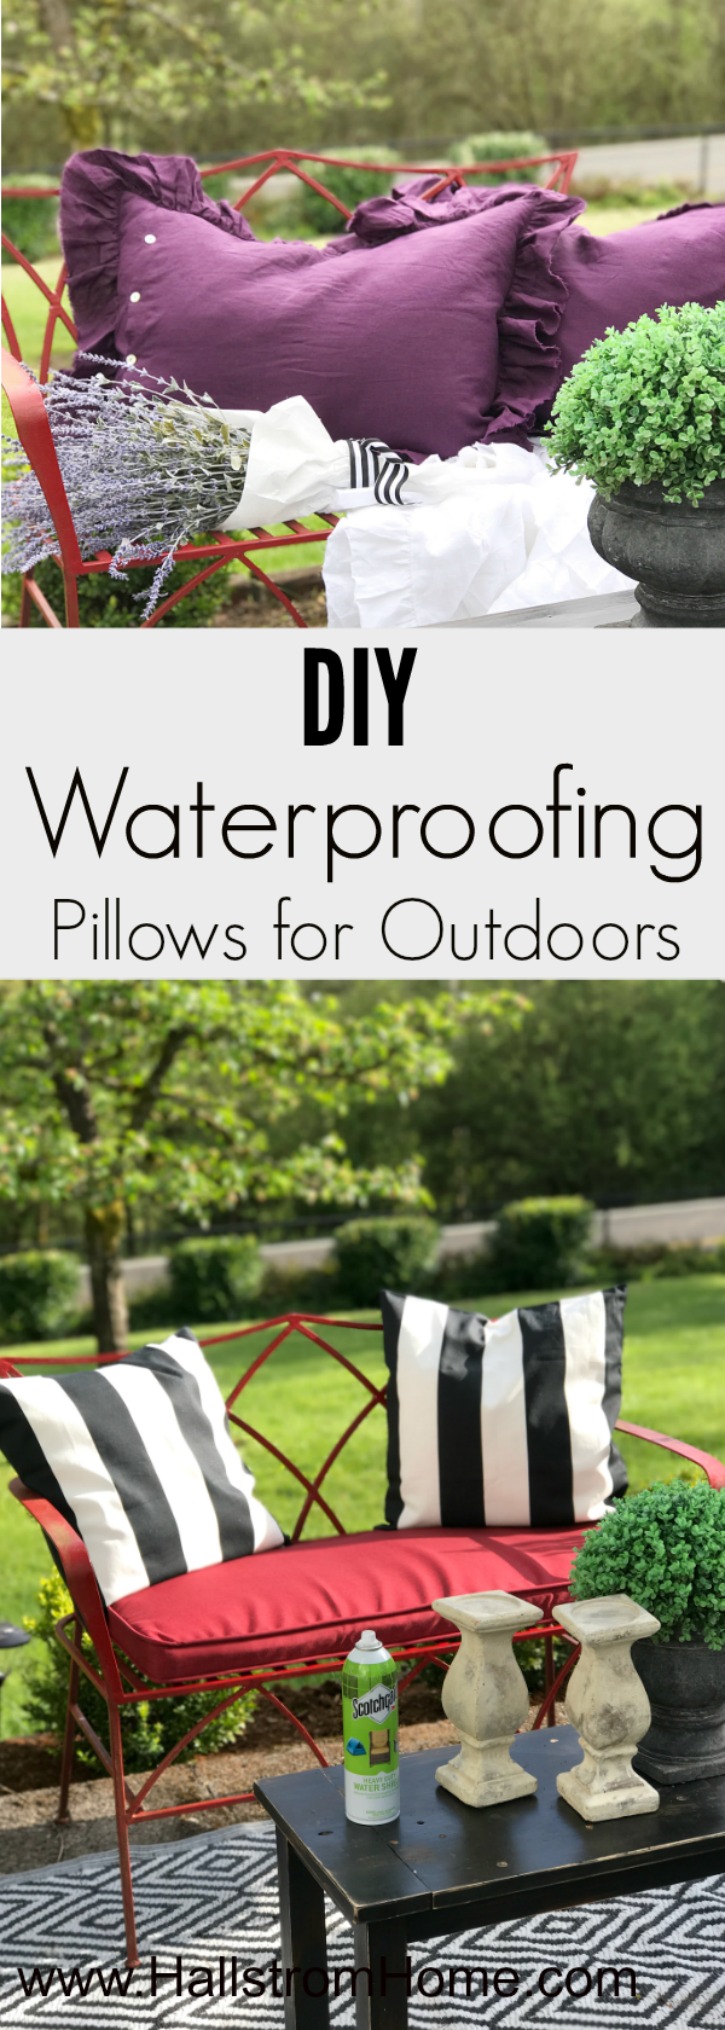 DIY Waterproofing Pillows for Outdoors